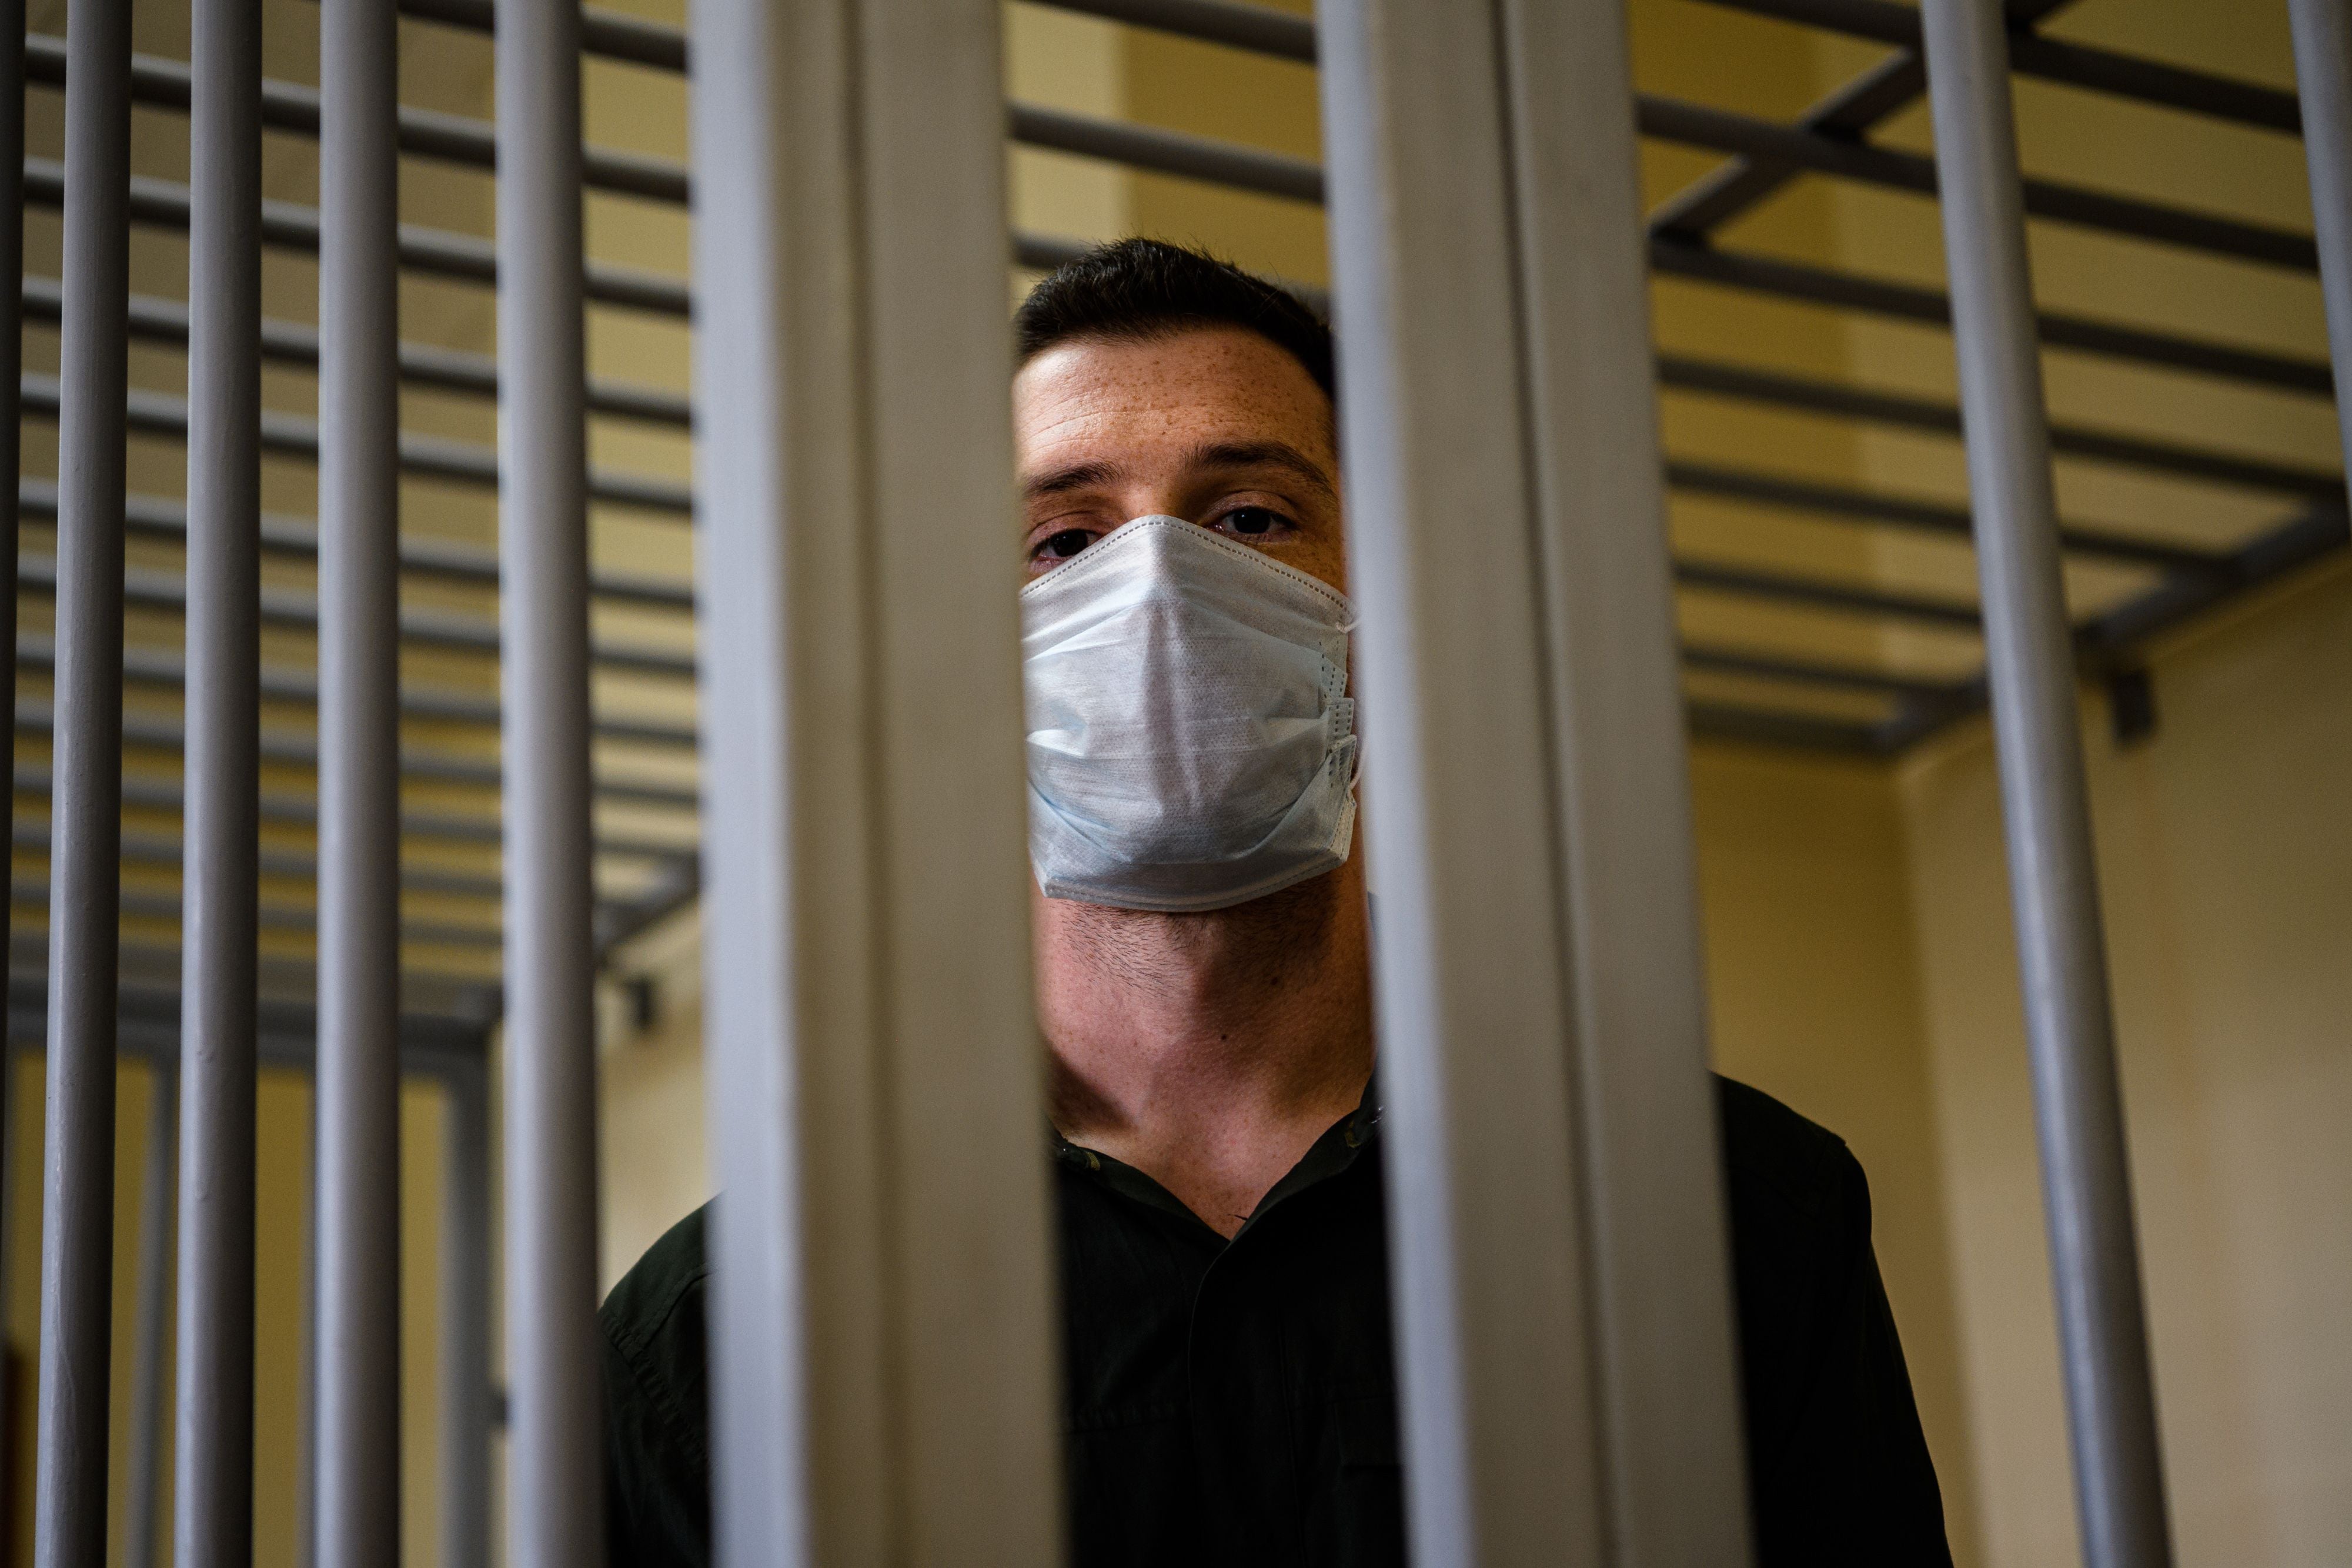 US ex-marine Trevor Reed, then charged with attacking police, stands inside a defendants’ cage during his verdict hearing at Moscow’s Golovinsky district court on 30 July, 2020.